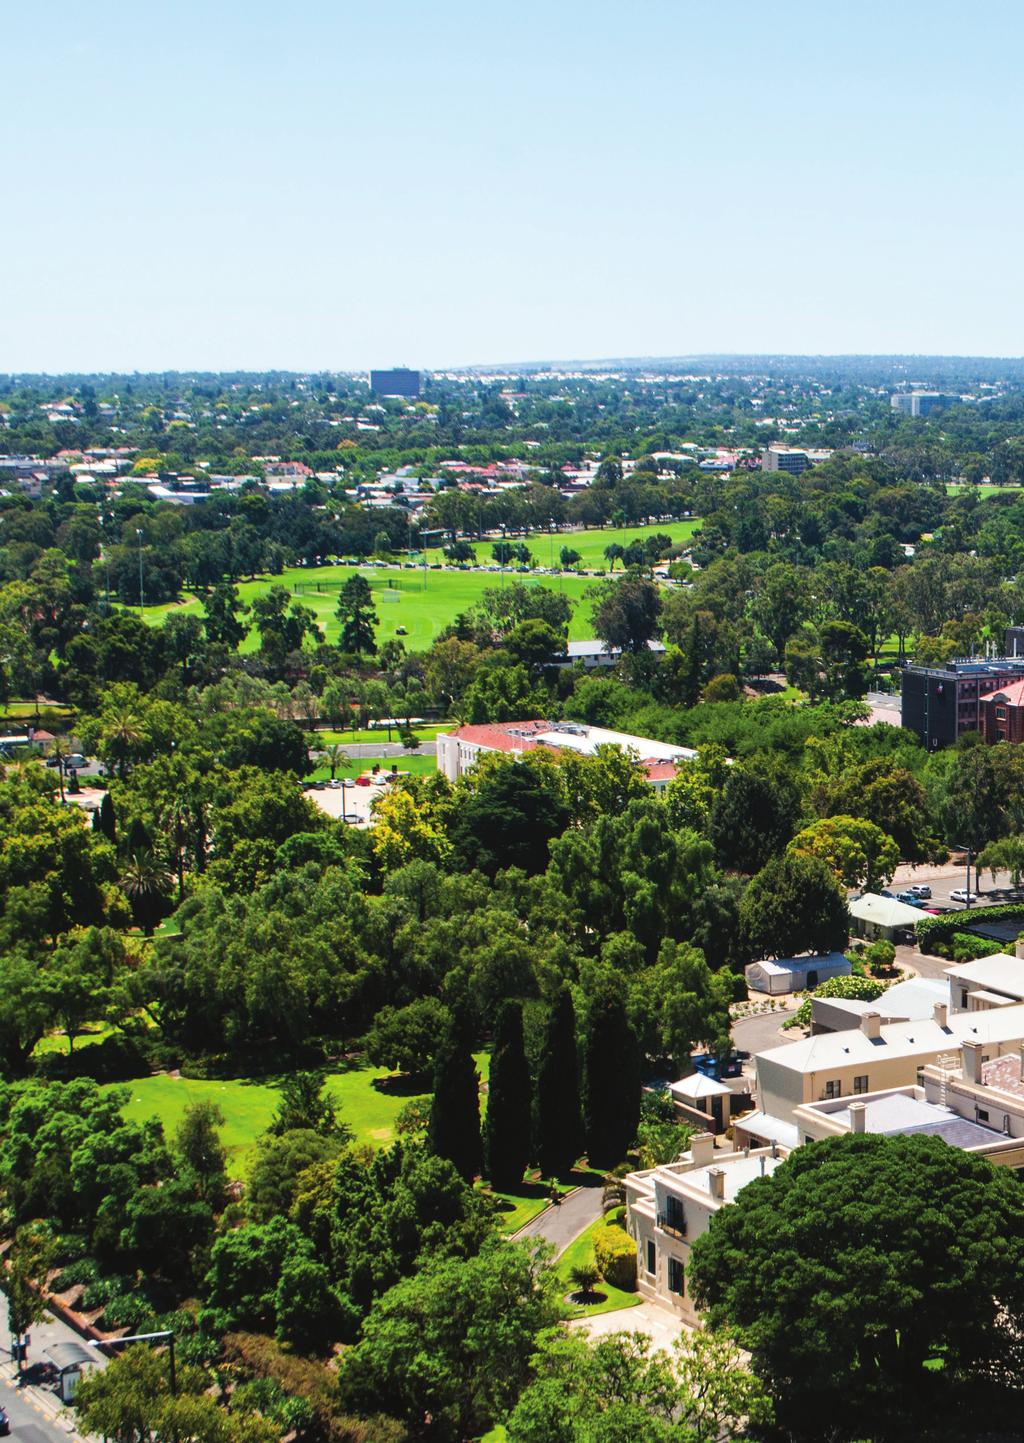 Green Adelaide We often think of cities as places for people, but the best cities in the world are those which have thriving natural environments in their midst.